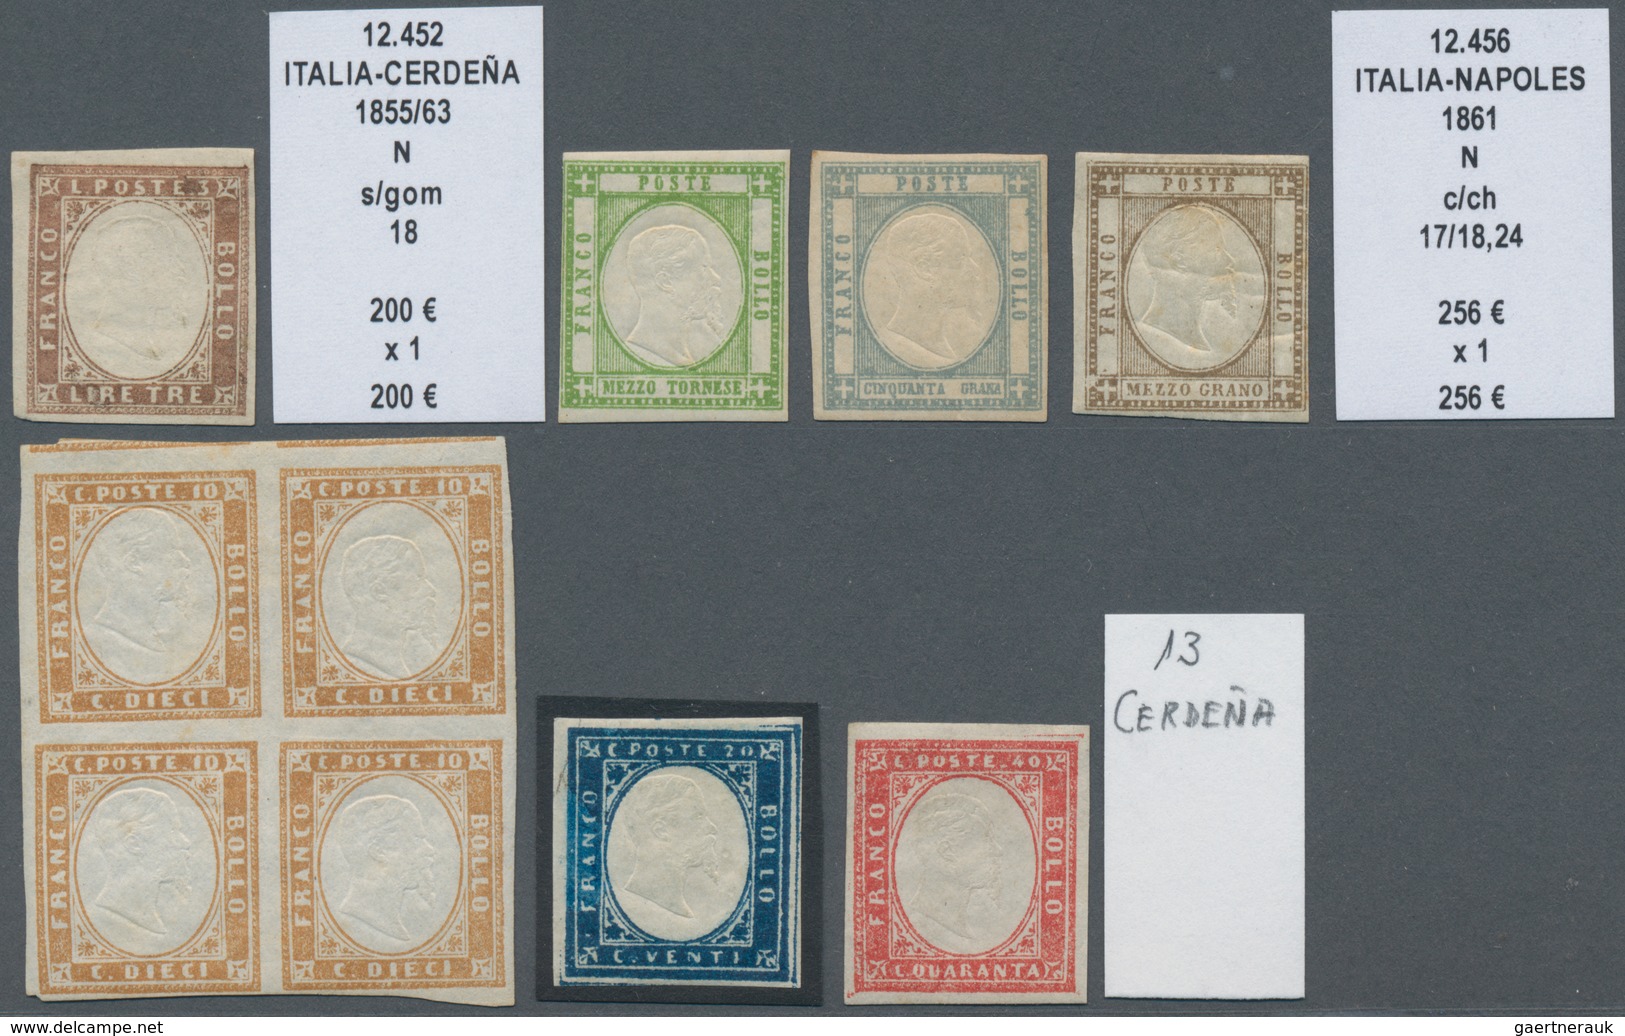 Altitalien: 1851-1862, Small Assembling Of 21 Mint Stamps Including Sicily, Sardinia, Modena, Parma, - Collections